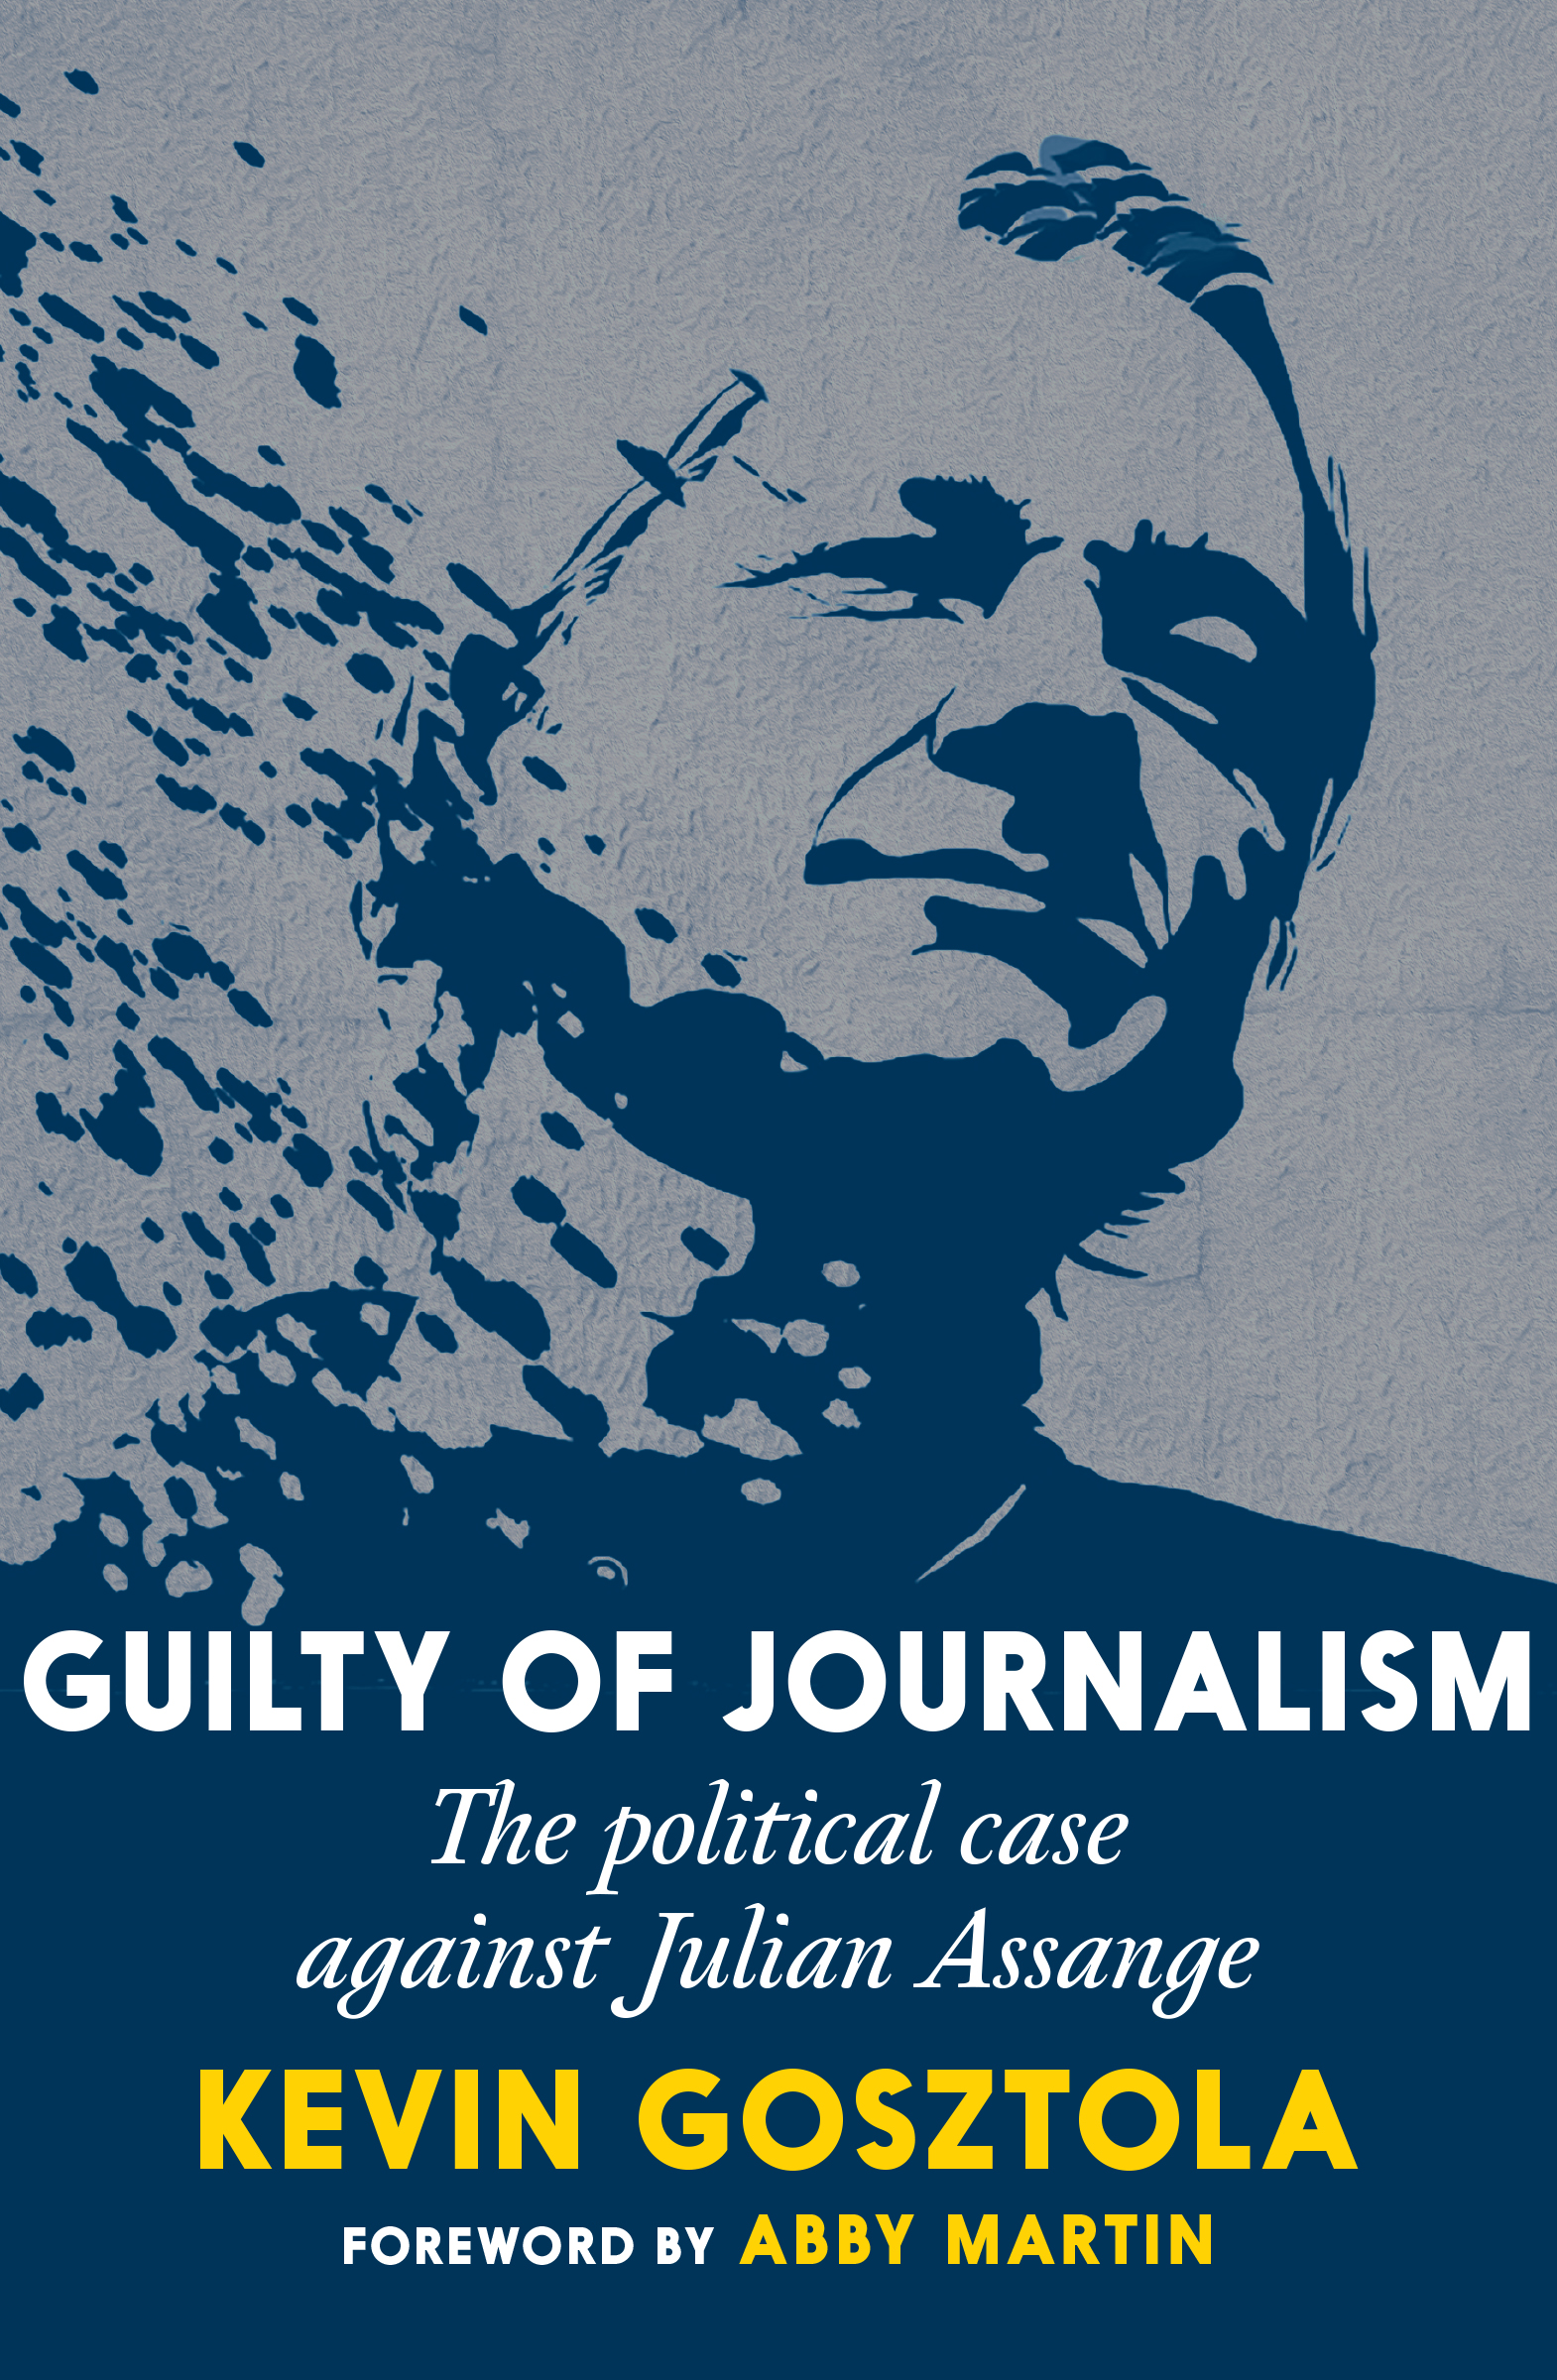 Guiltyofjournalism_coverfront